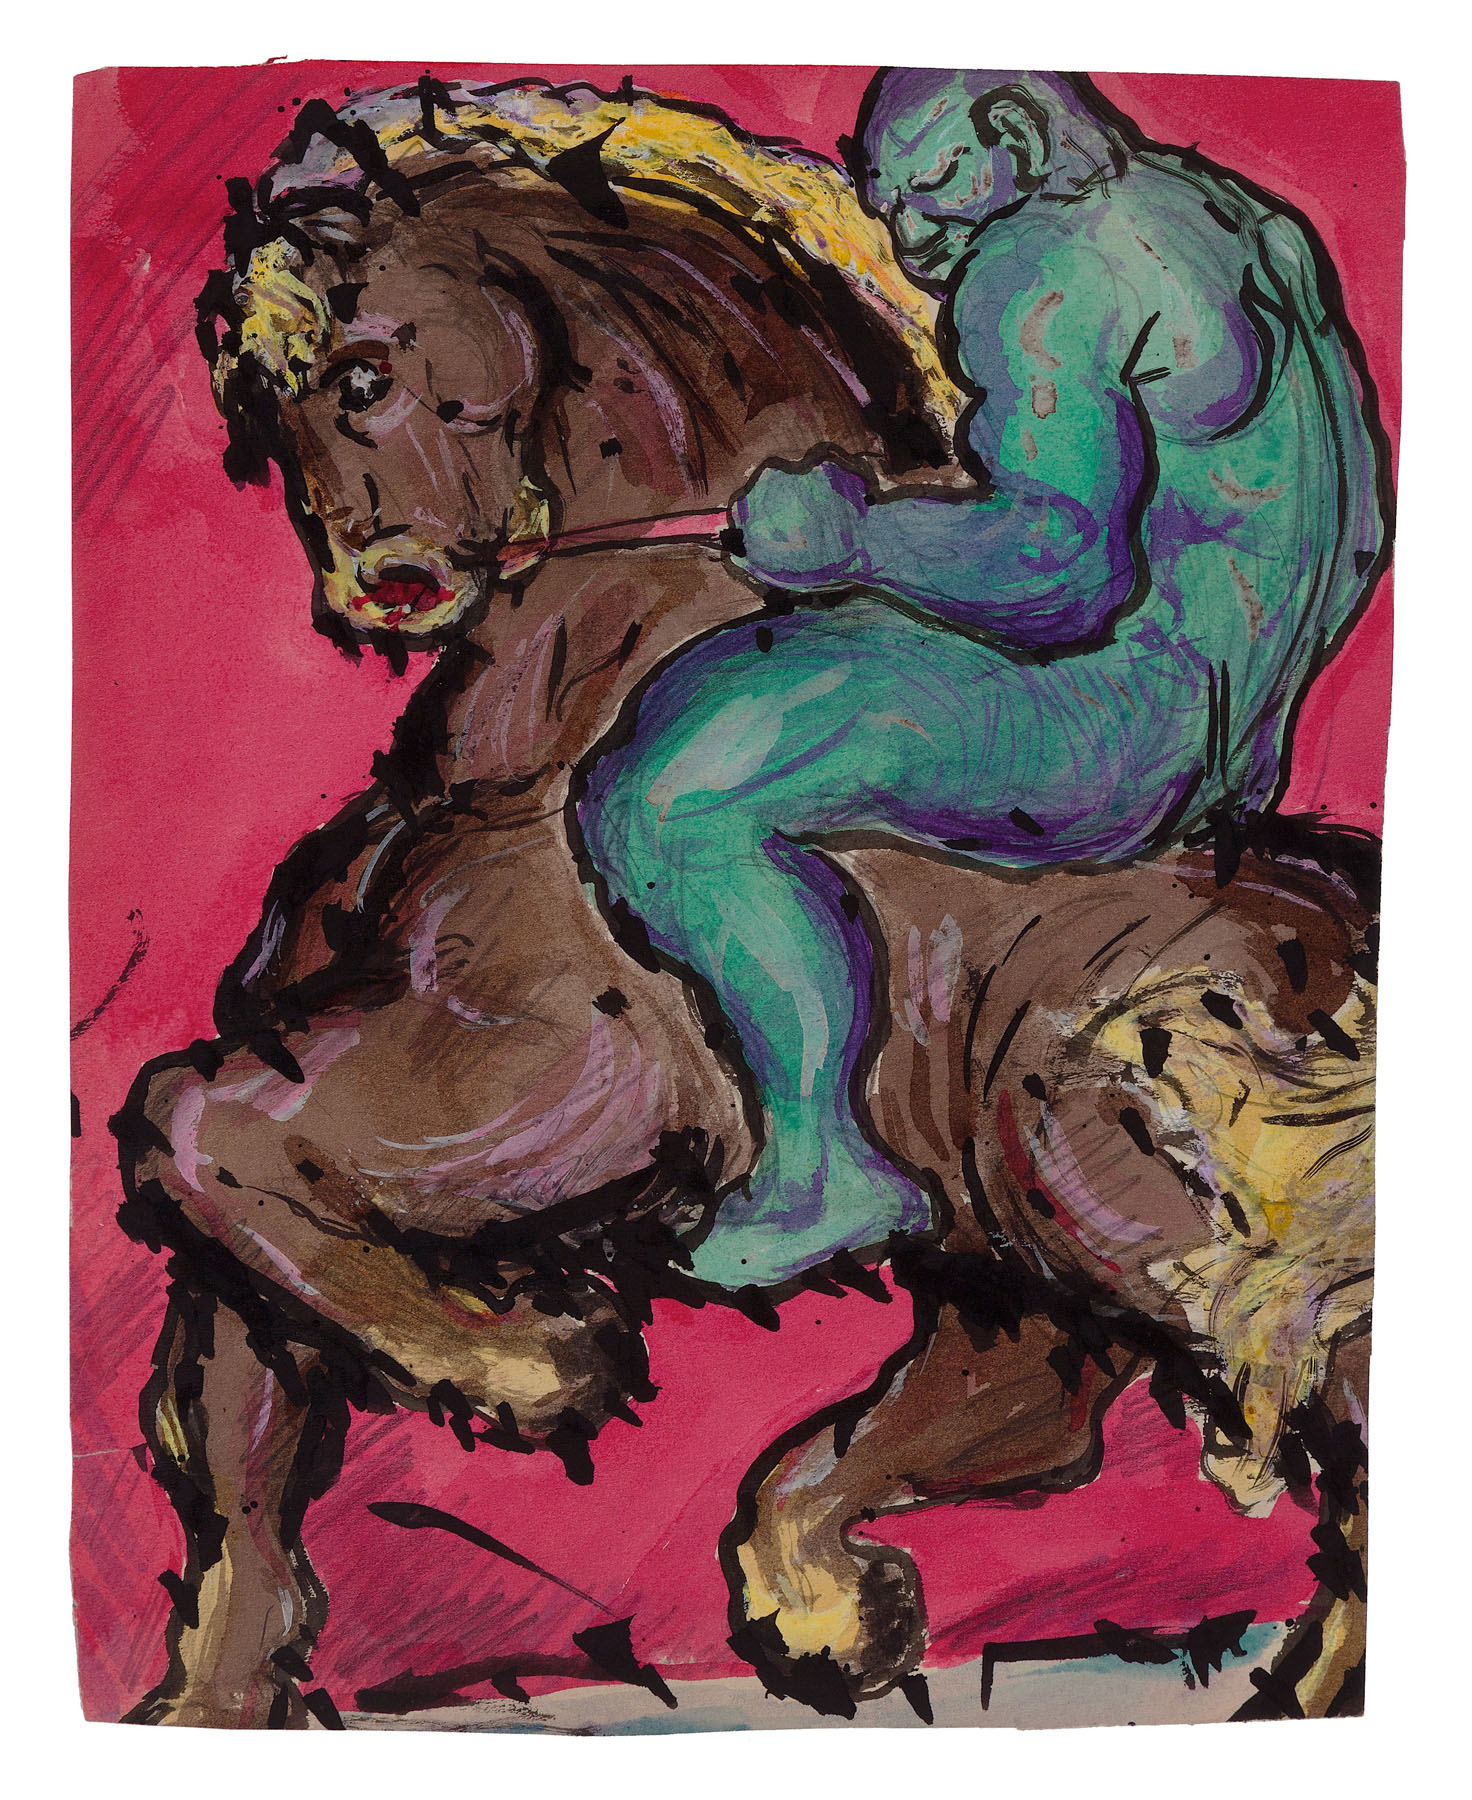 Horse and Rider, c. 1916. Gouache, watercolour, black ink and graphite on paper, 13.3 x 10.5 in. (34 x 26.5 cm). Private collection. Photo Malcolm Varon ©Bianca Stock